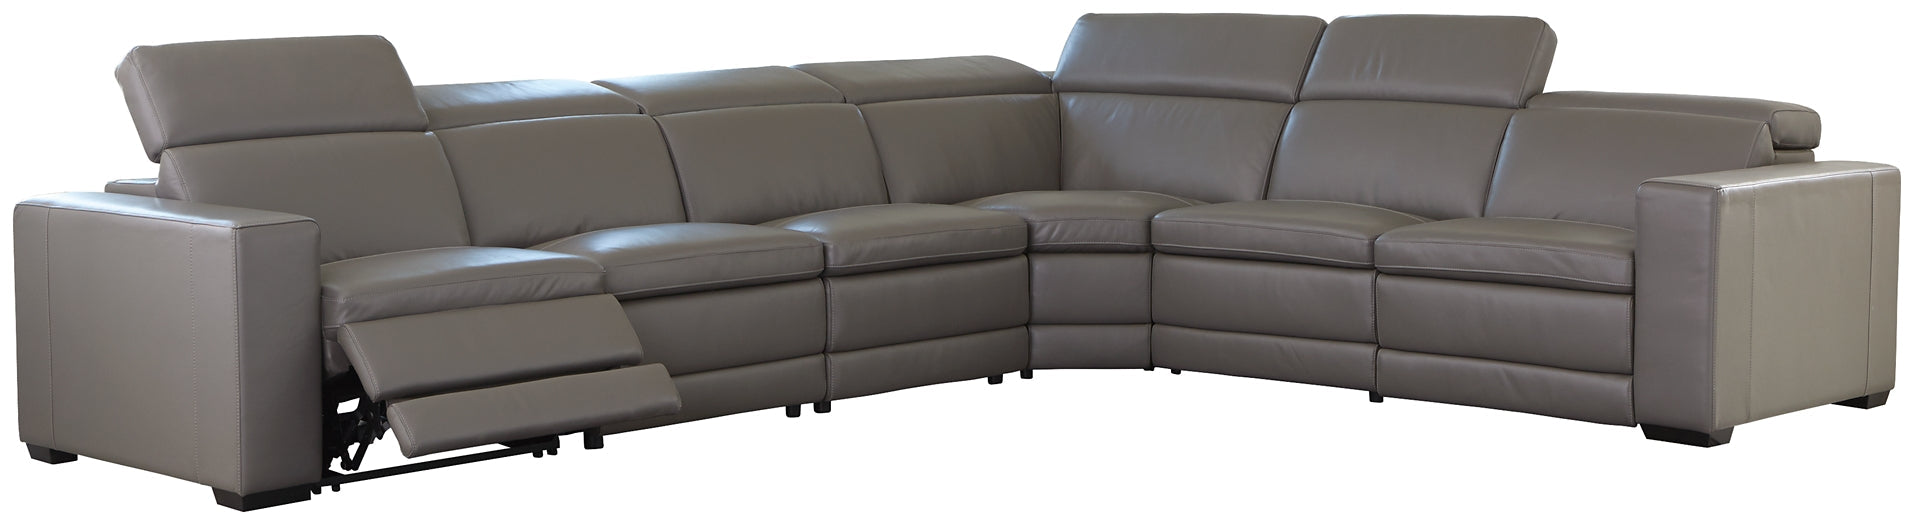 Texline 7-Piece Power Reclining Sectional Smyrna Furniture Outlet